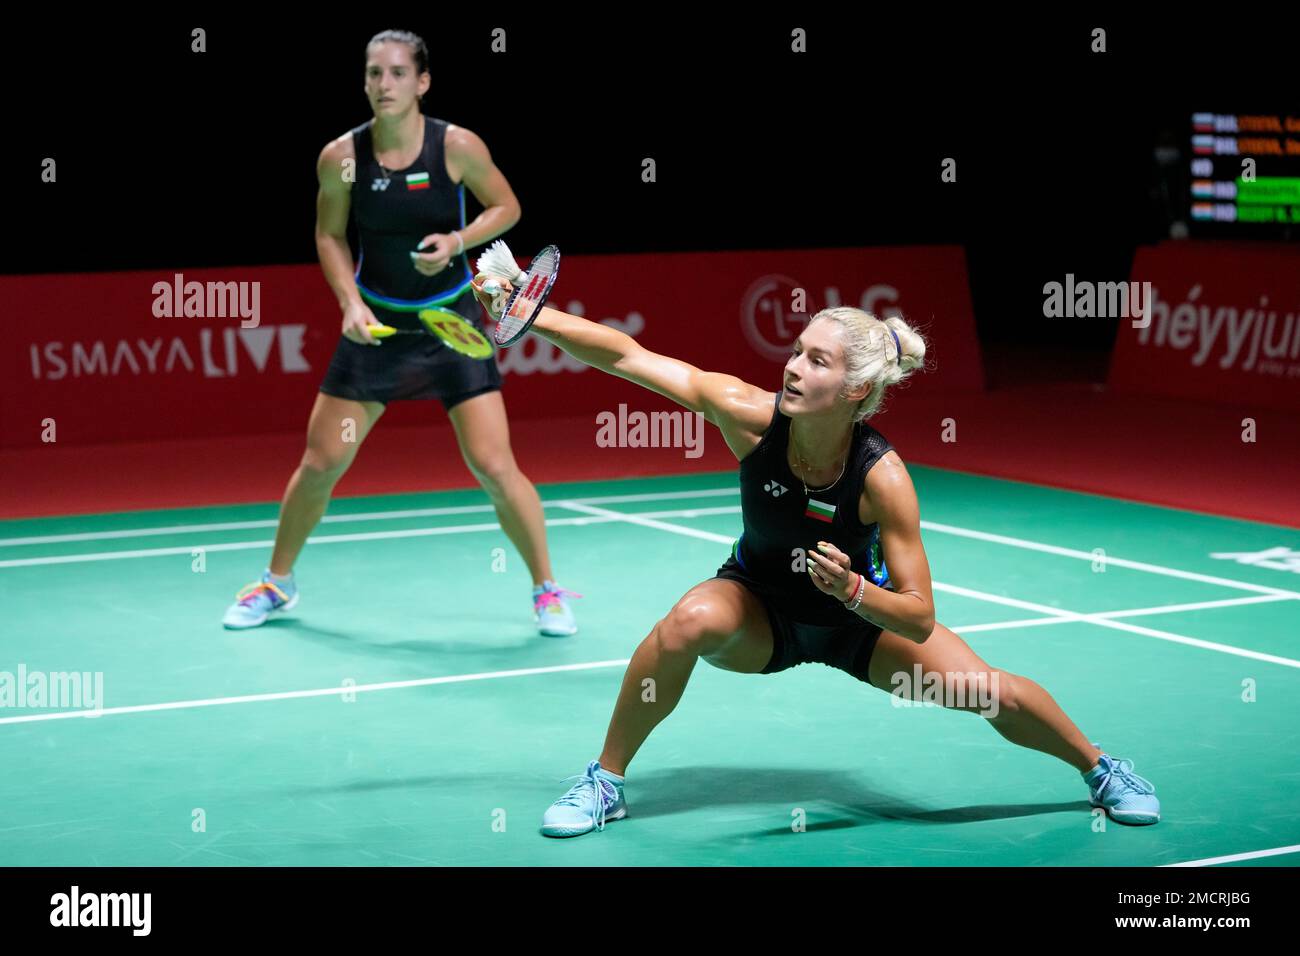 Bulgaria's Gabriela Stoeva, right, and Stefani Stoeva compete against  India's Ashwini Ponnappa and Sikki N. Reddy during their women's doubles  badminton group stage match at the BWF World Tour Finals in Nusa